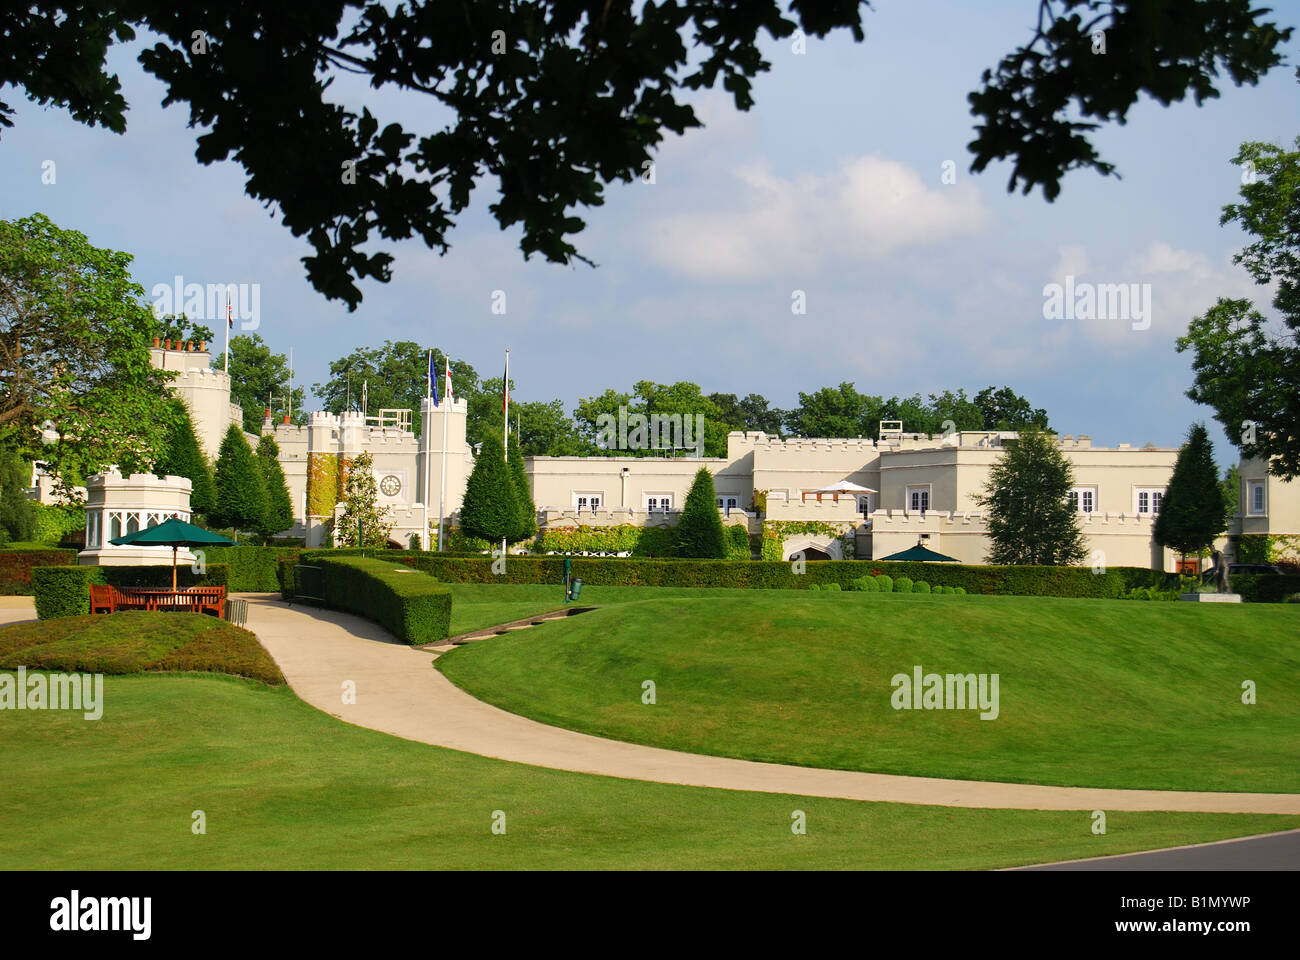 Le Wentworth Golf Club & Resort, Wentworth Drive, Virginia Water, Surrey, Angleterre, Royaume-Uni Banque D'Images